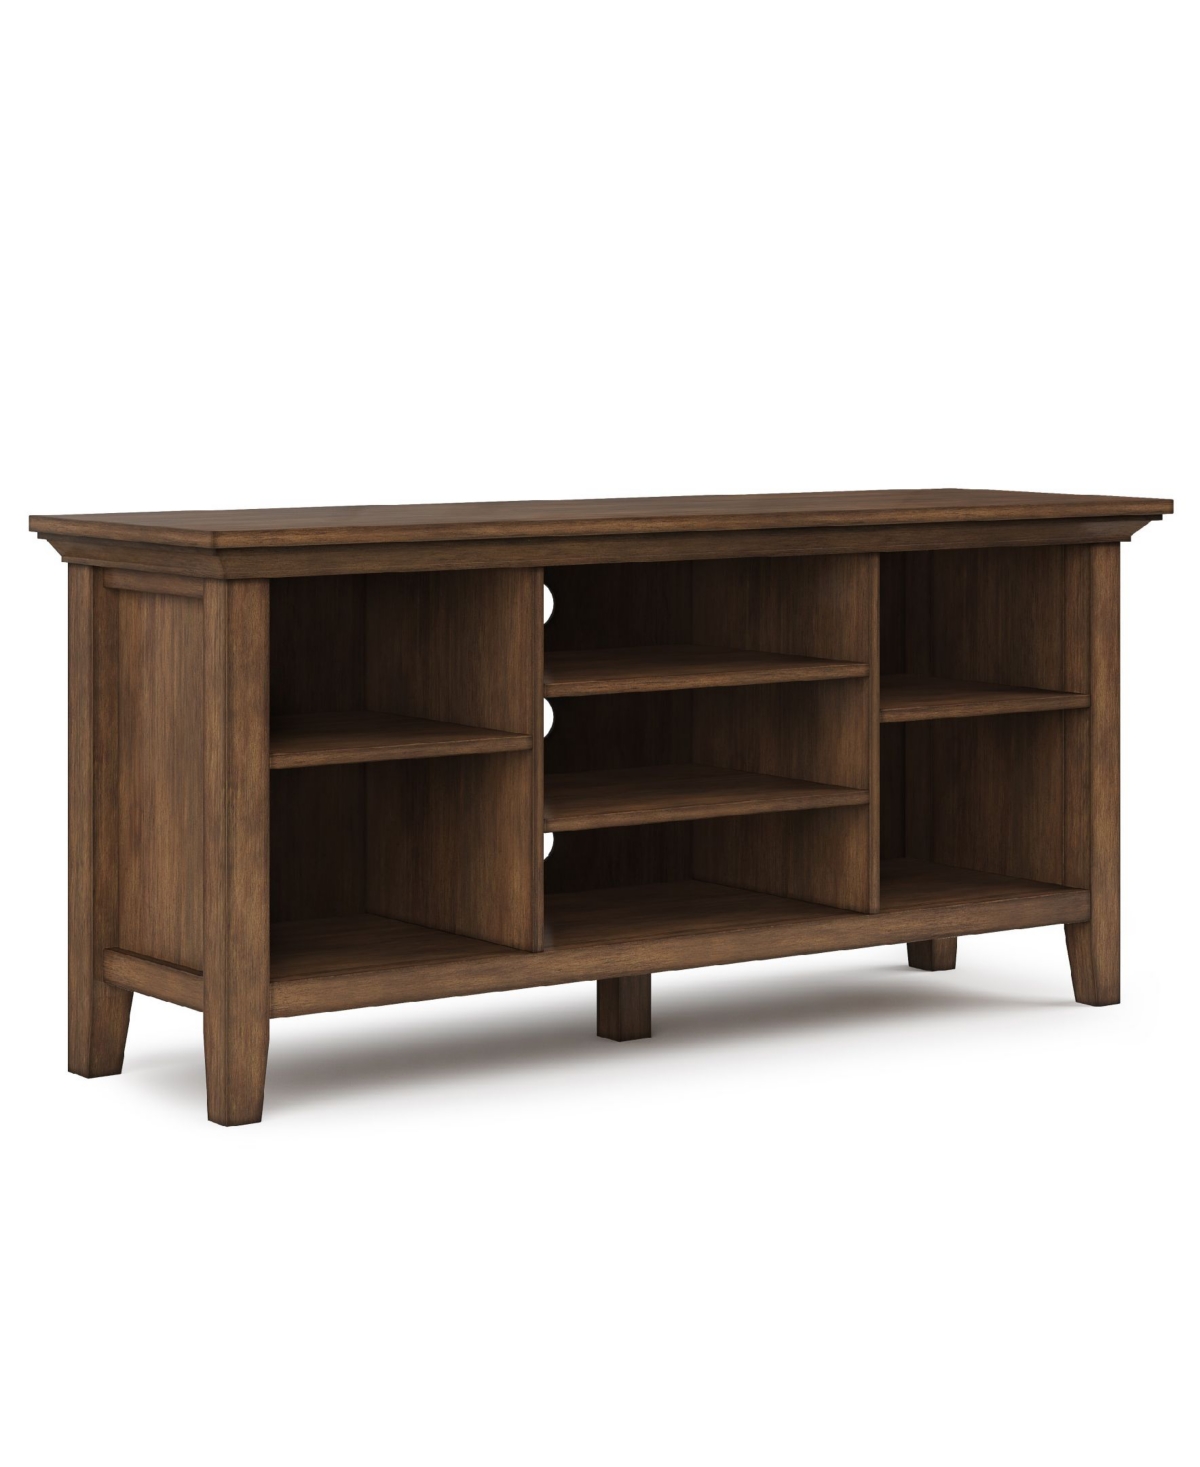 Simpli Home Redmond Solid Wood Tv Media Stand With Open Shelves In Rustic Natural Brown